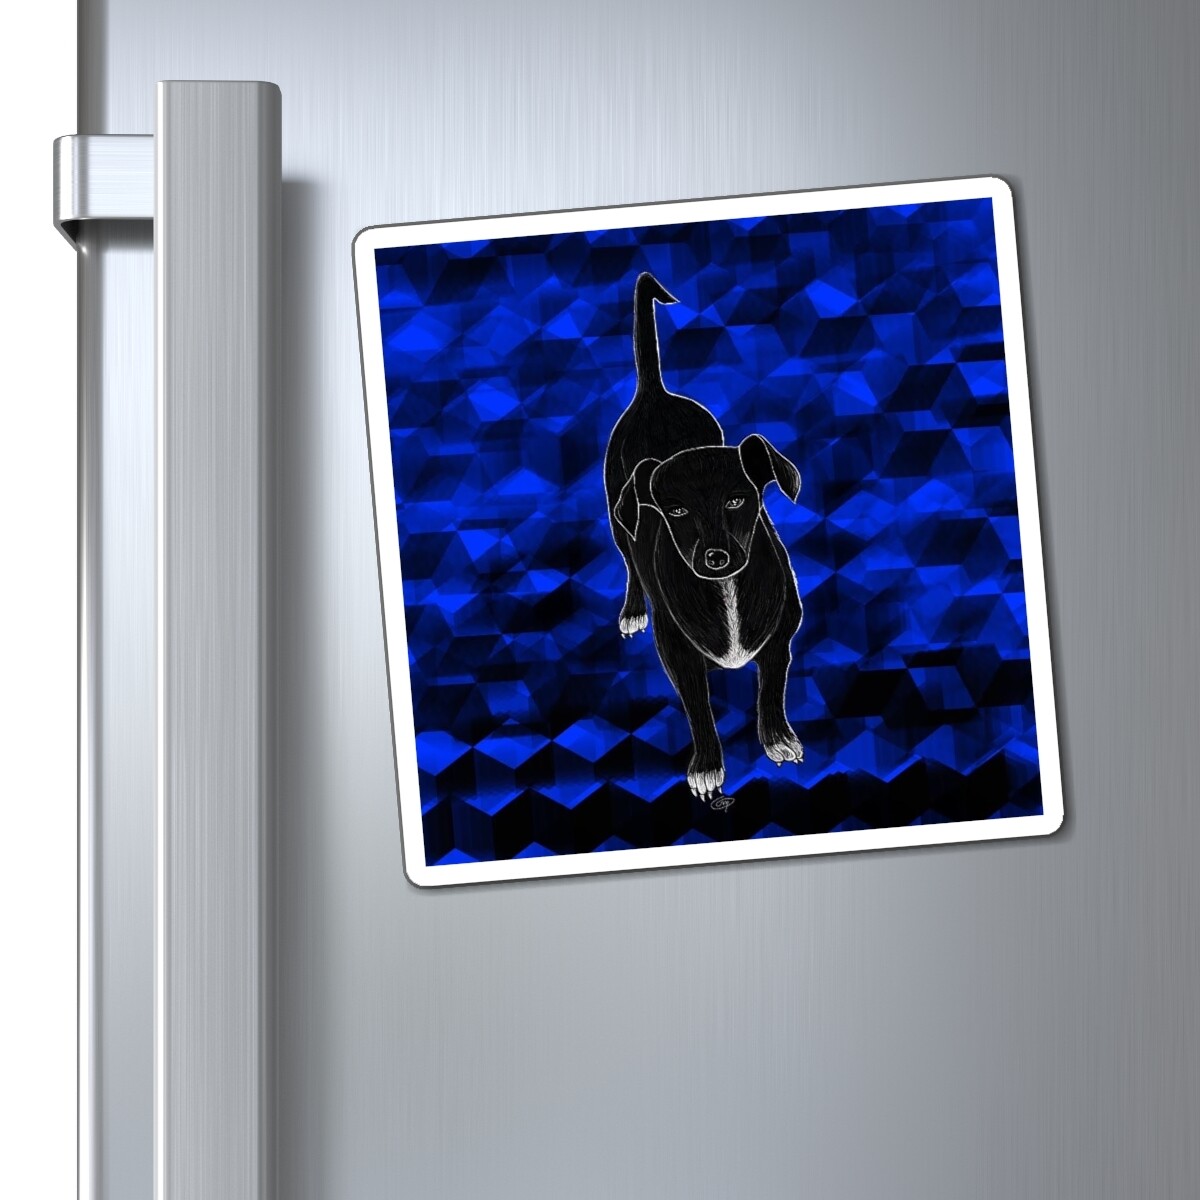 Personalized custom Pet Portrait Square Magnets Create your own dog cat pet fridge magnets bulk Gift 3 sizes  3"x3" 4x4" 6x6" Great gift